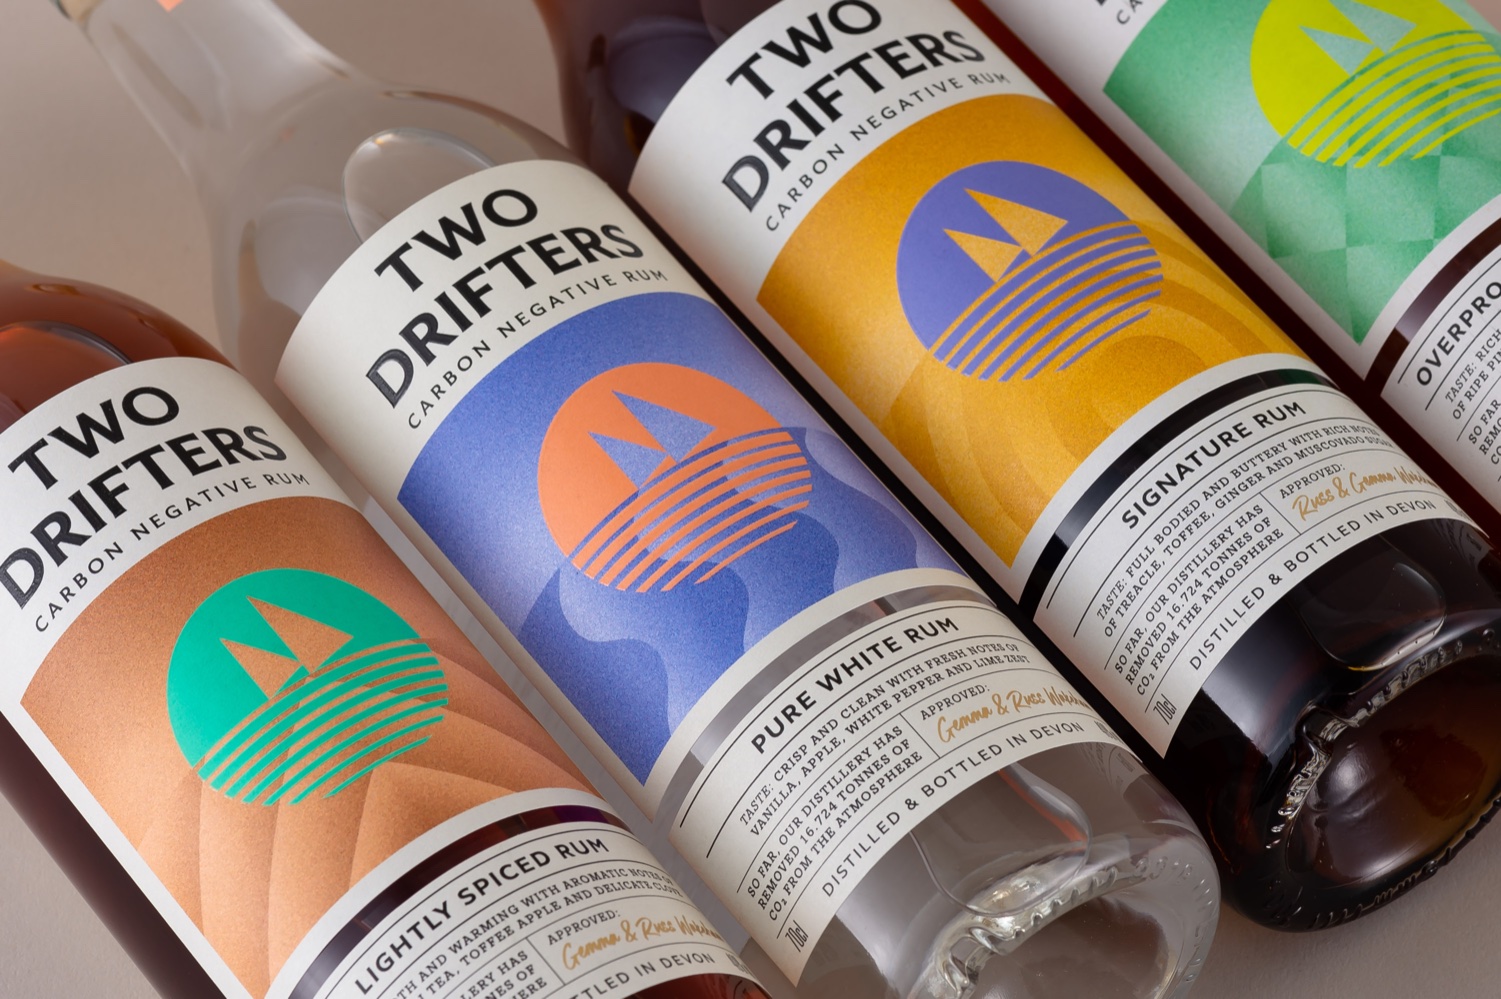 Two Drifters Carbon Negative Rum Is Grounded In Provenance And Sustainability